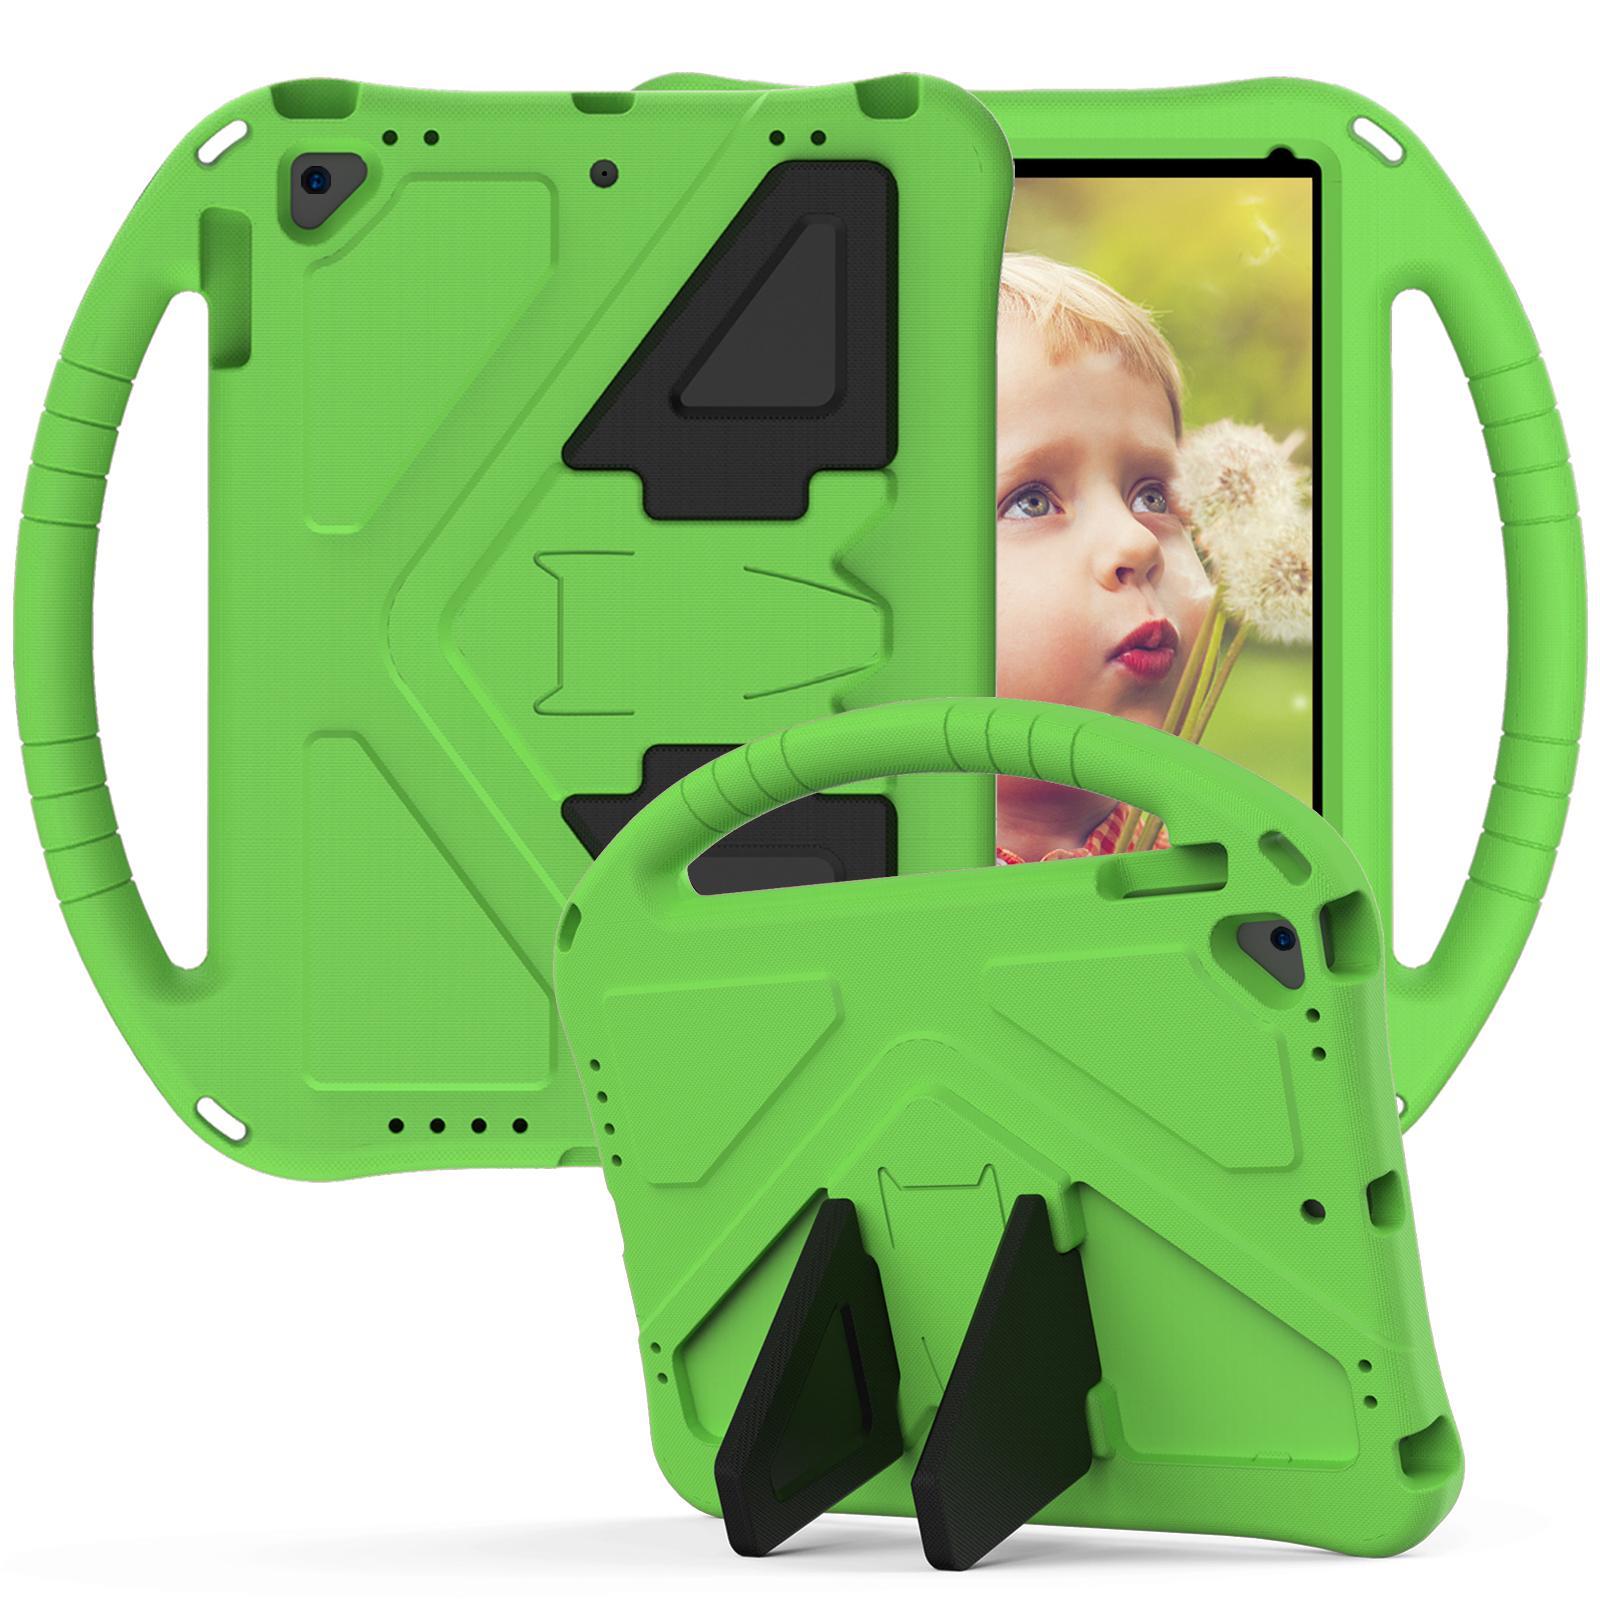 MCC Kids iPad Air 2 (2nd Gen) Case Cover Apple Shockproof Air2 Wing [Green]